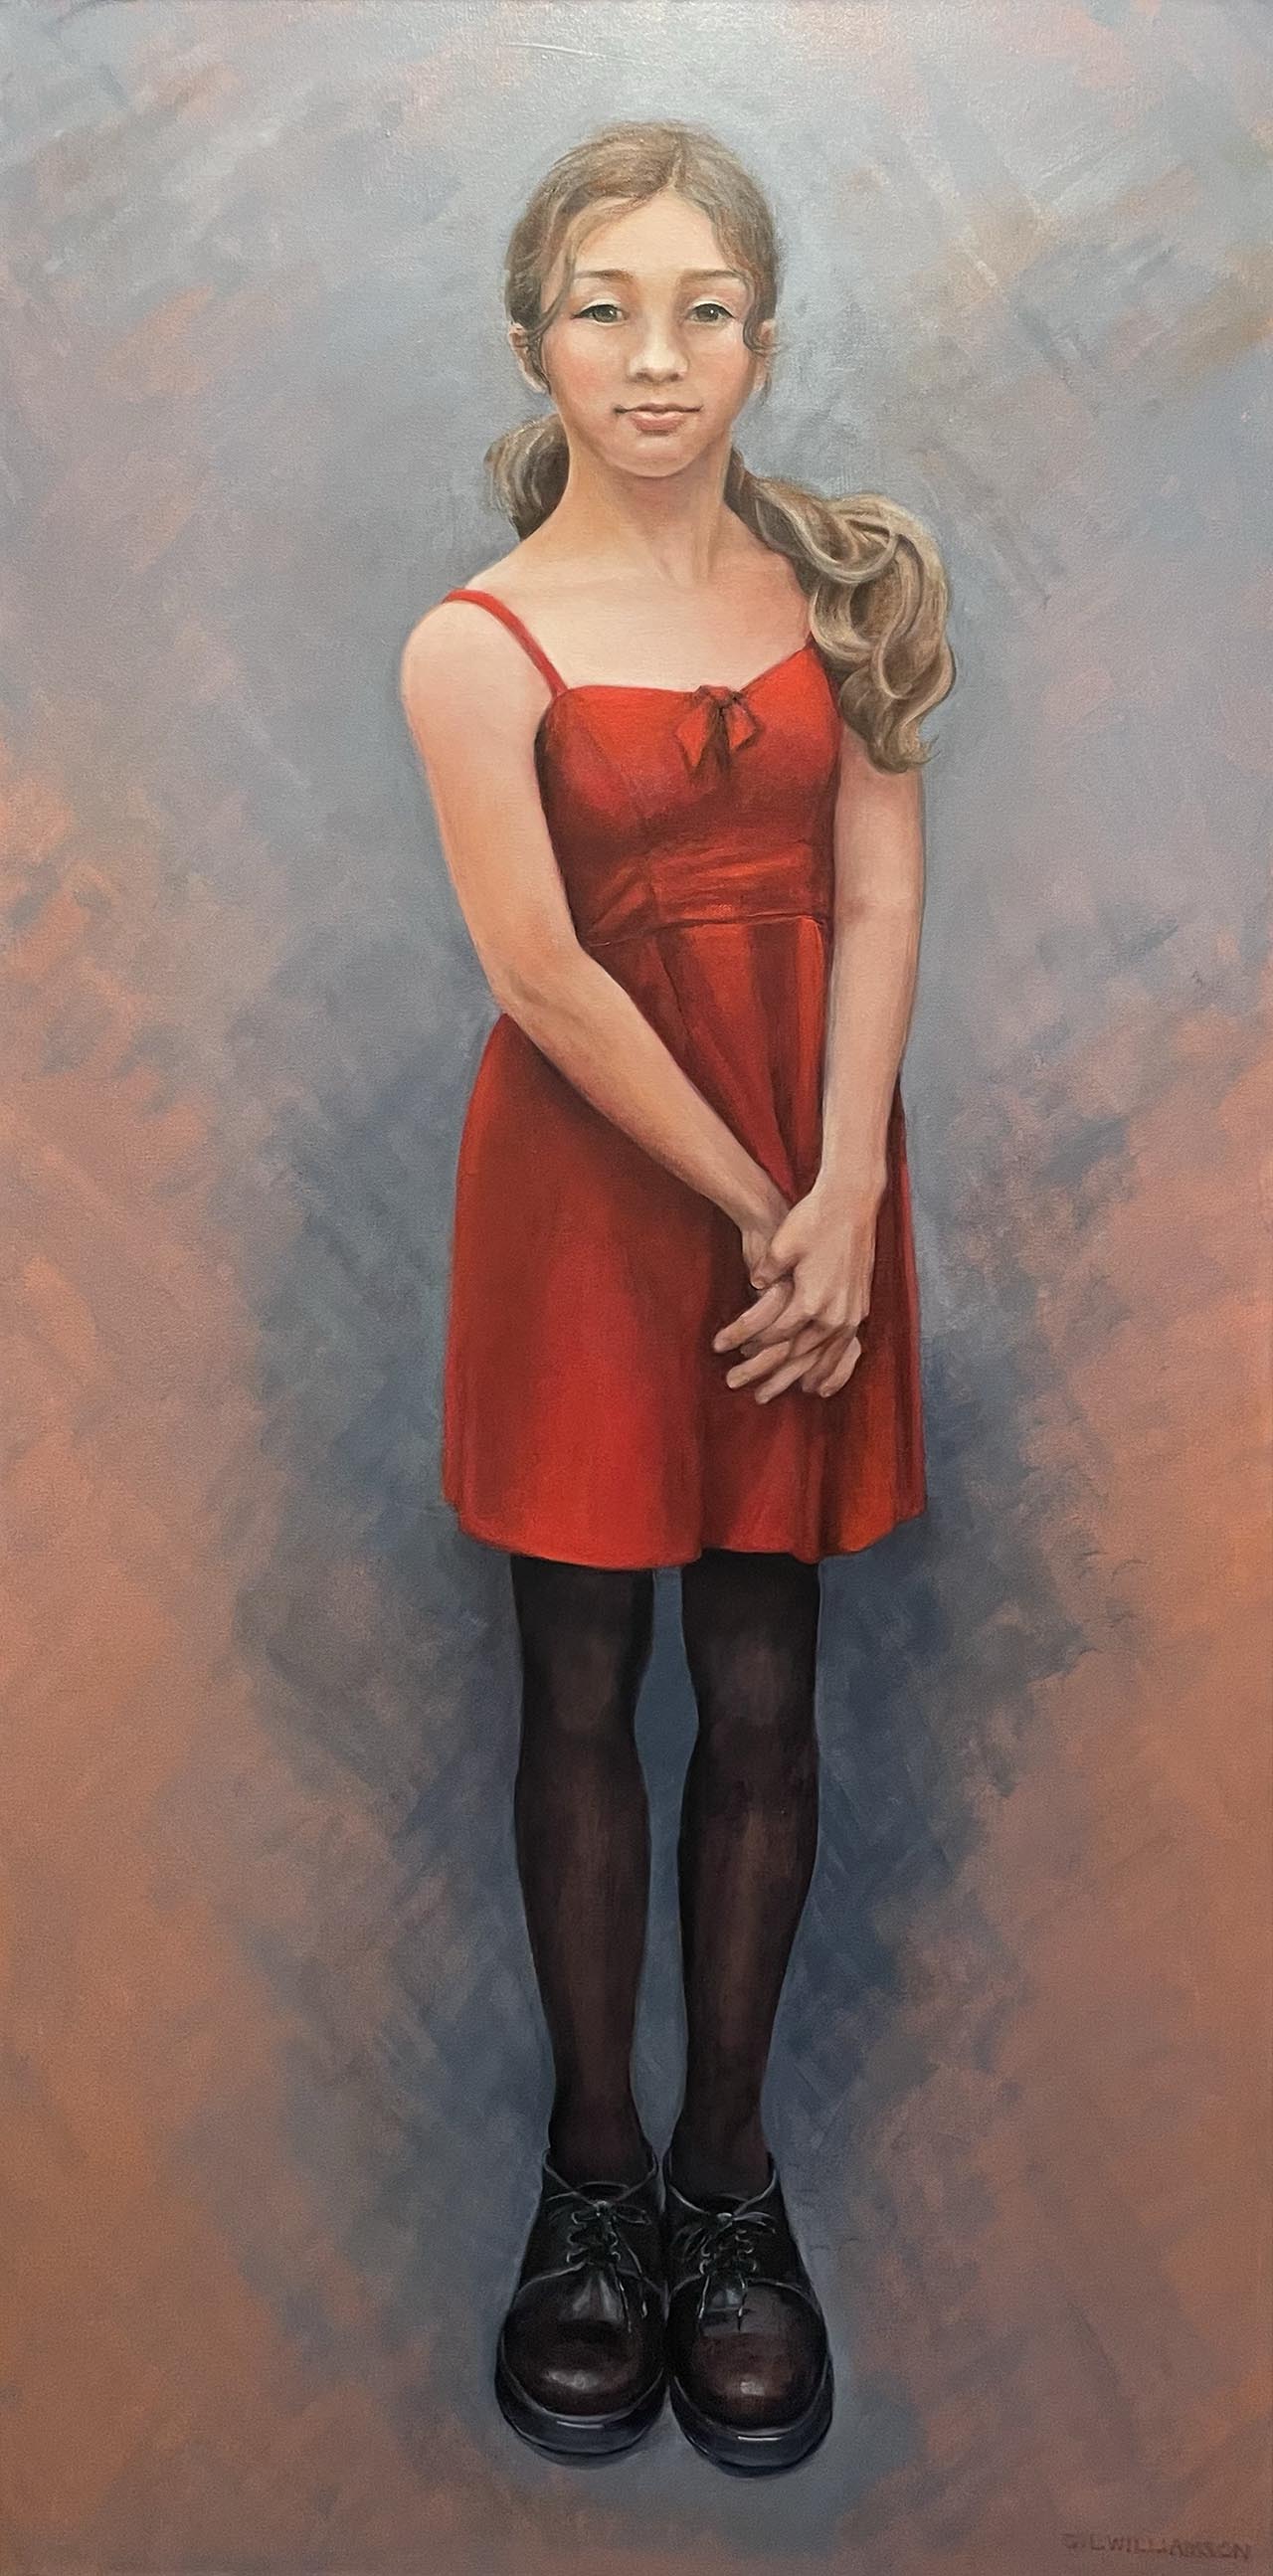 Oil painting of a young woman wearing a red dress a black boots.. Painted by Carol Williamson.